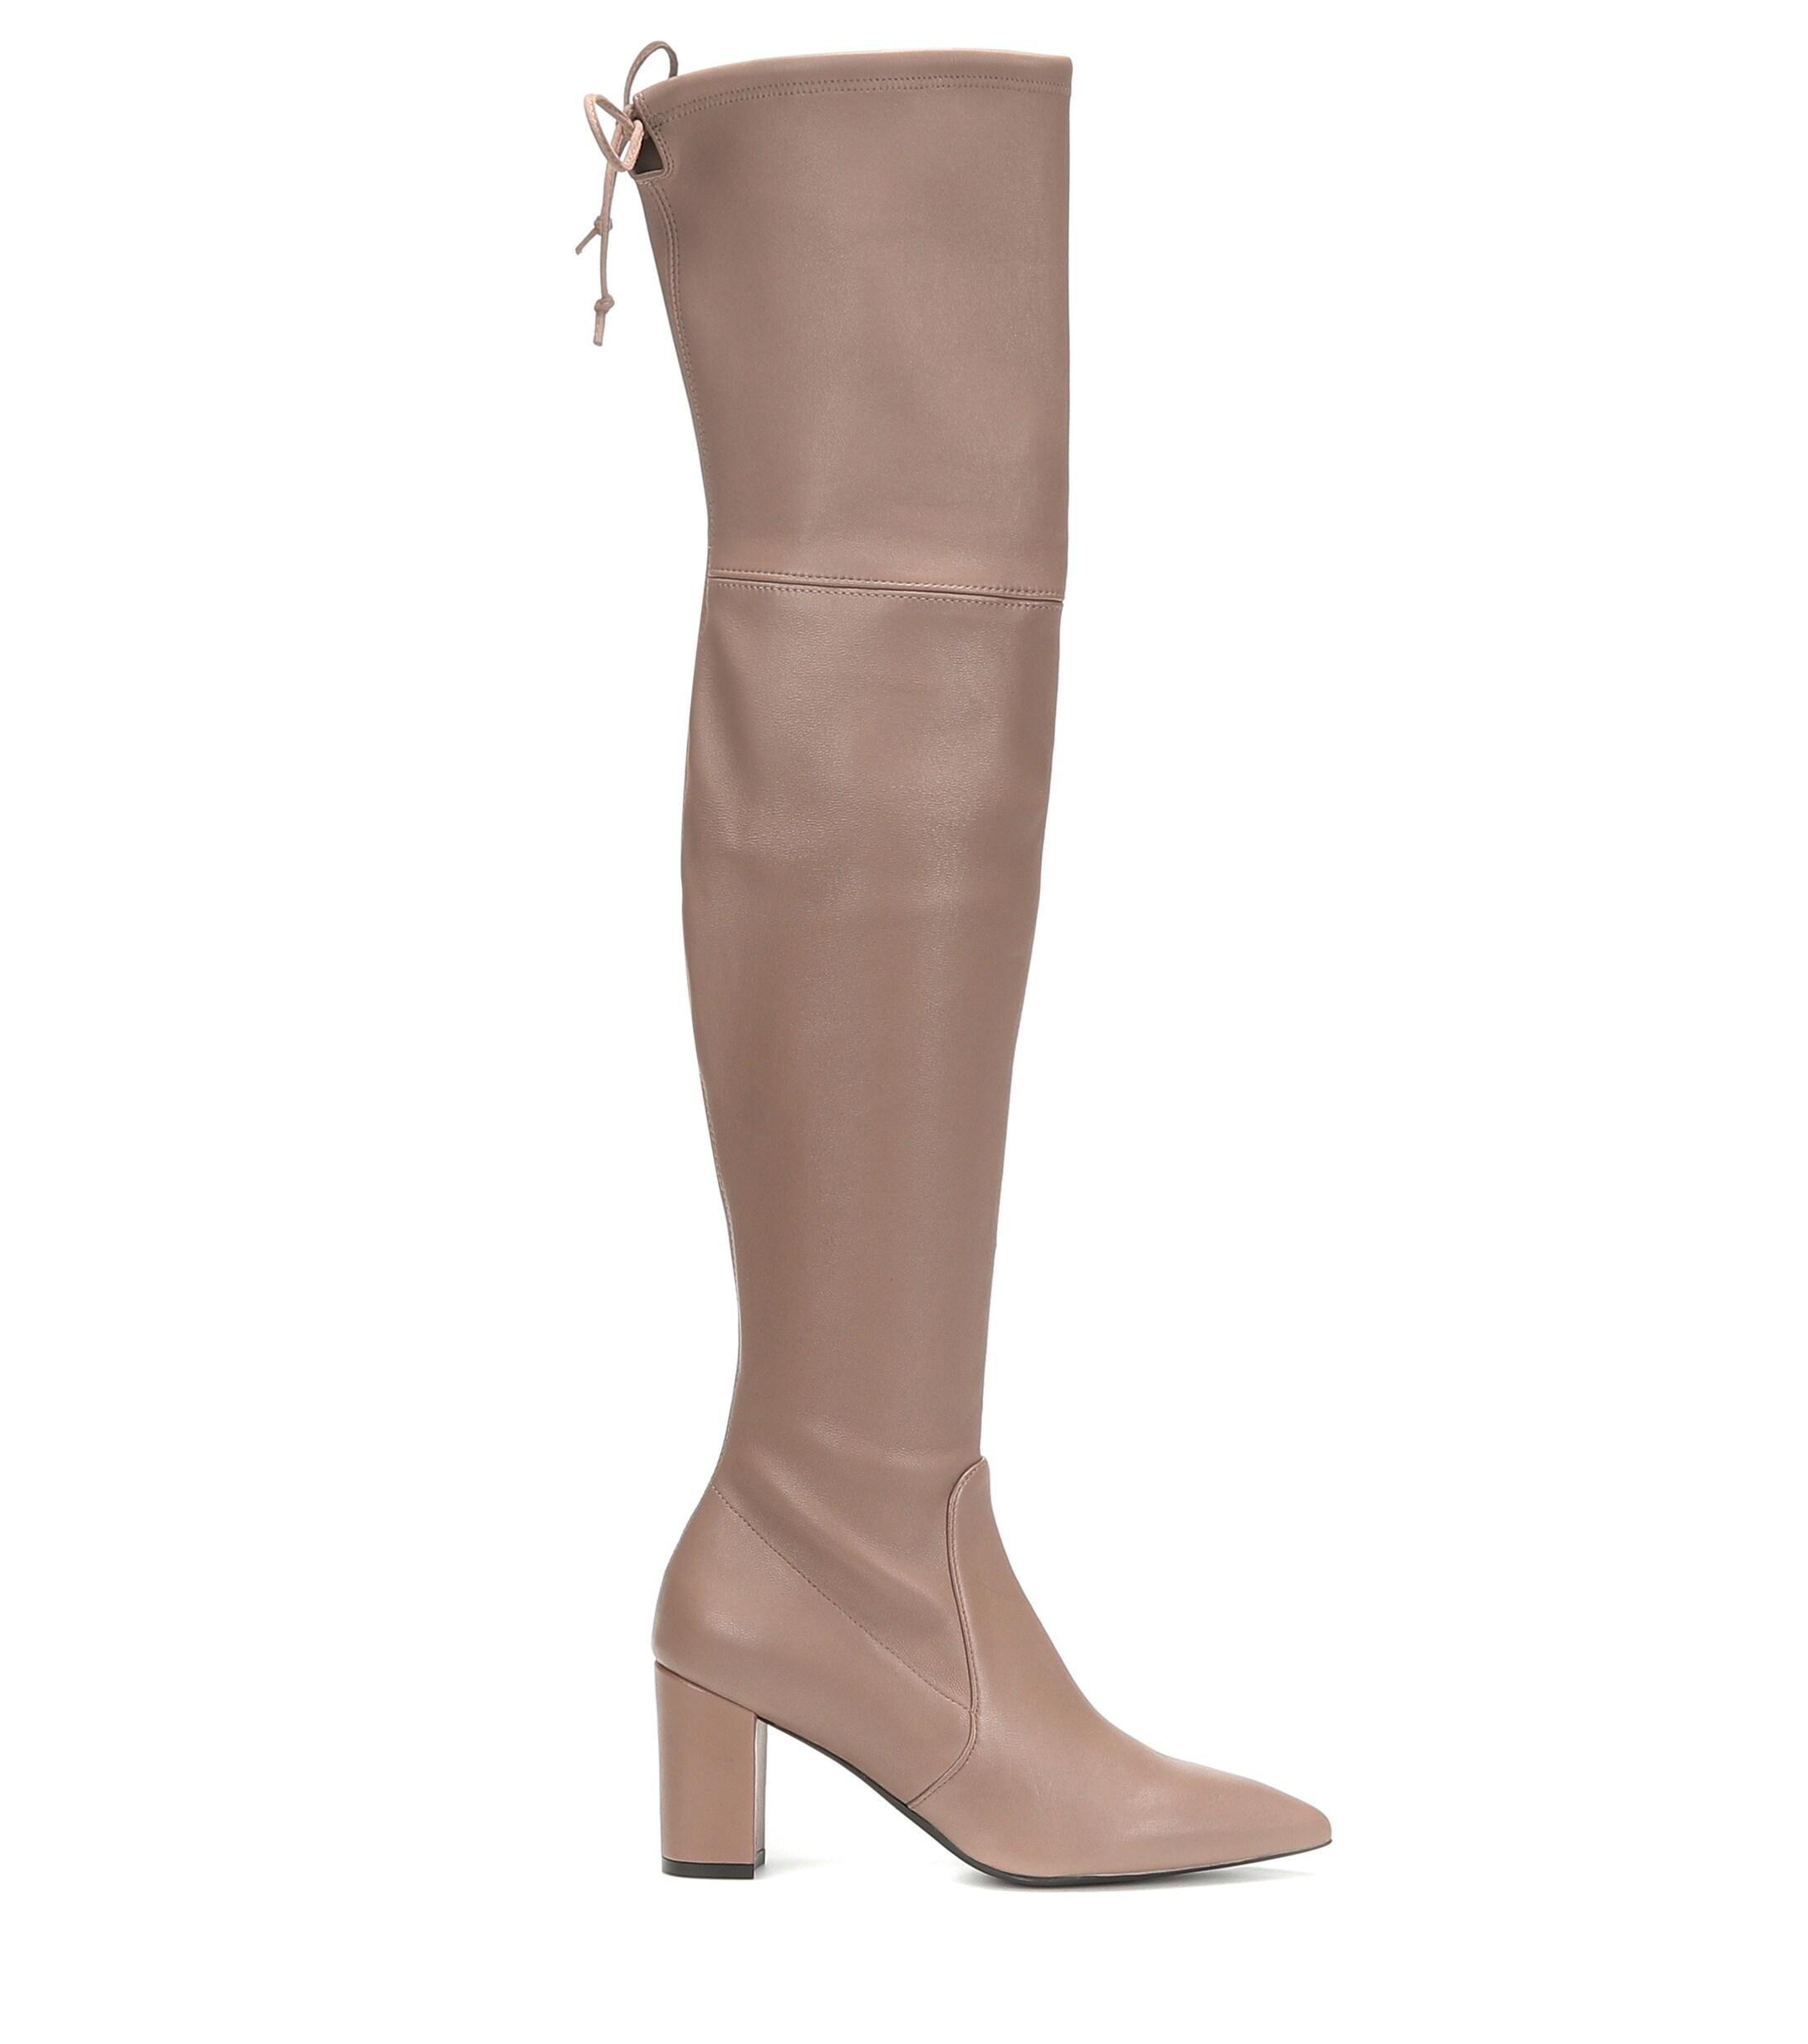 Stuart Weitzman Leather Lesley 75 Over-the-knee Boots in Beige (Brown) -  Lyst